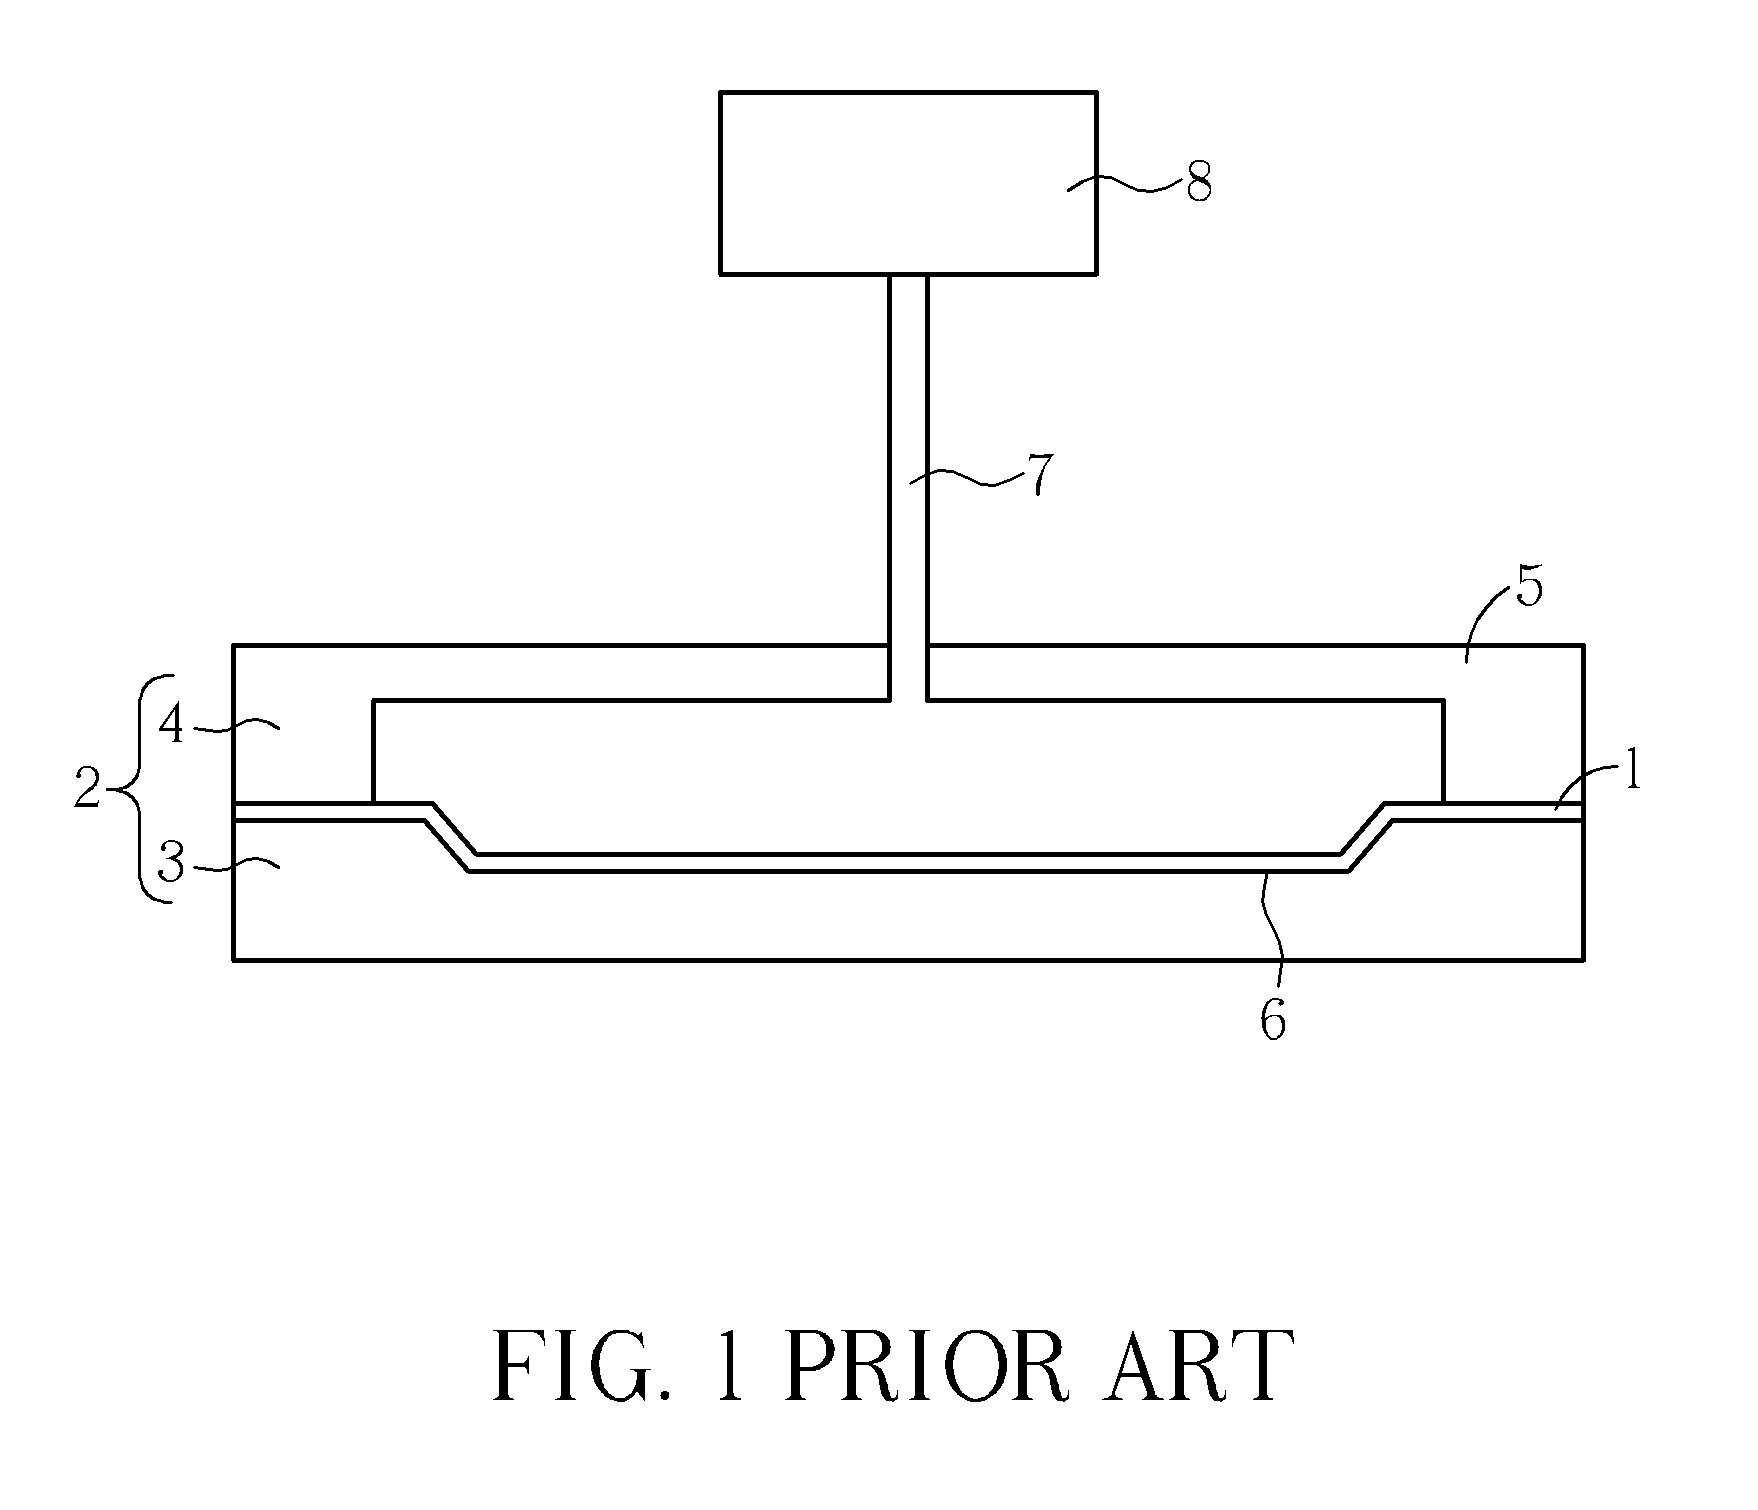 Molding apparatus and gas compression molding process